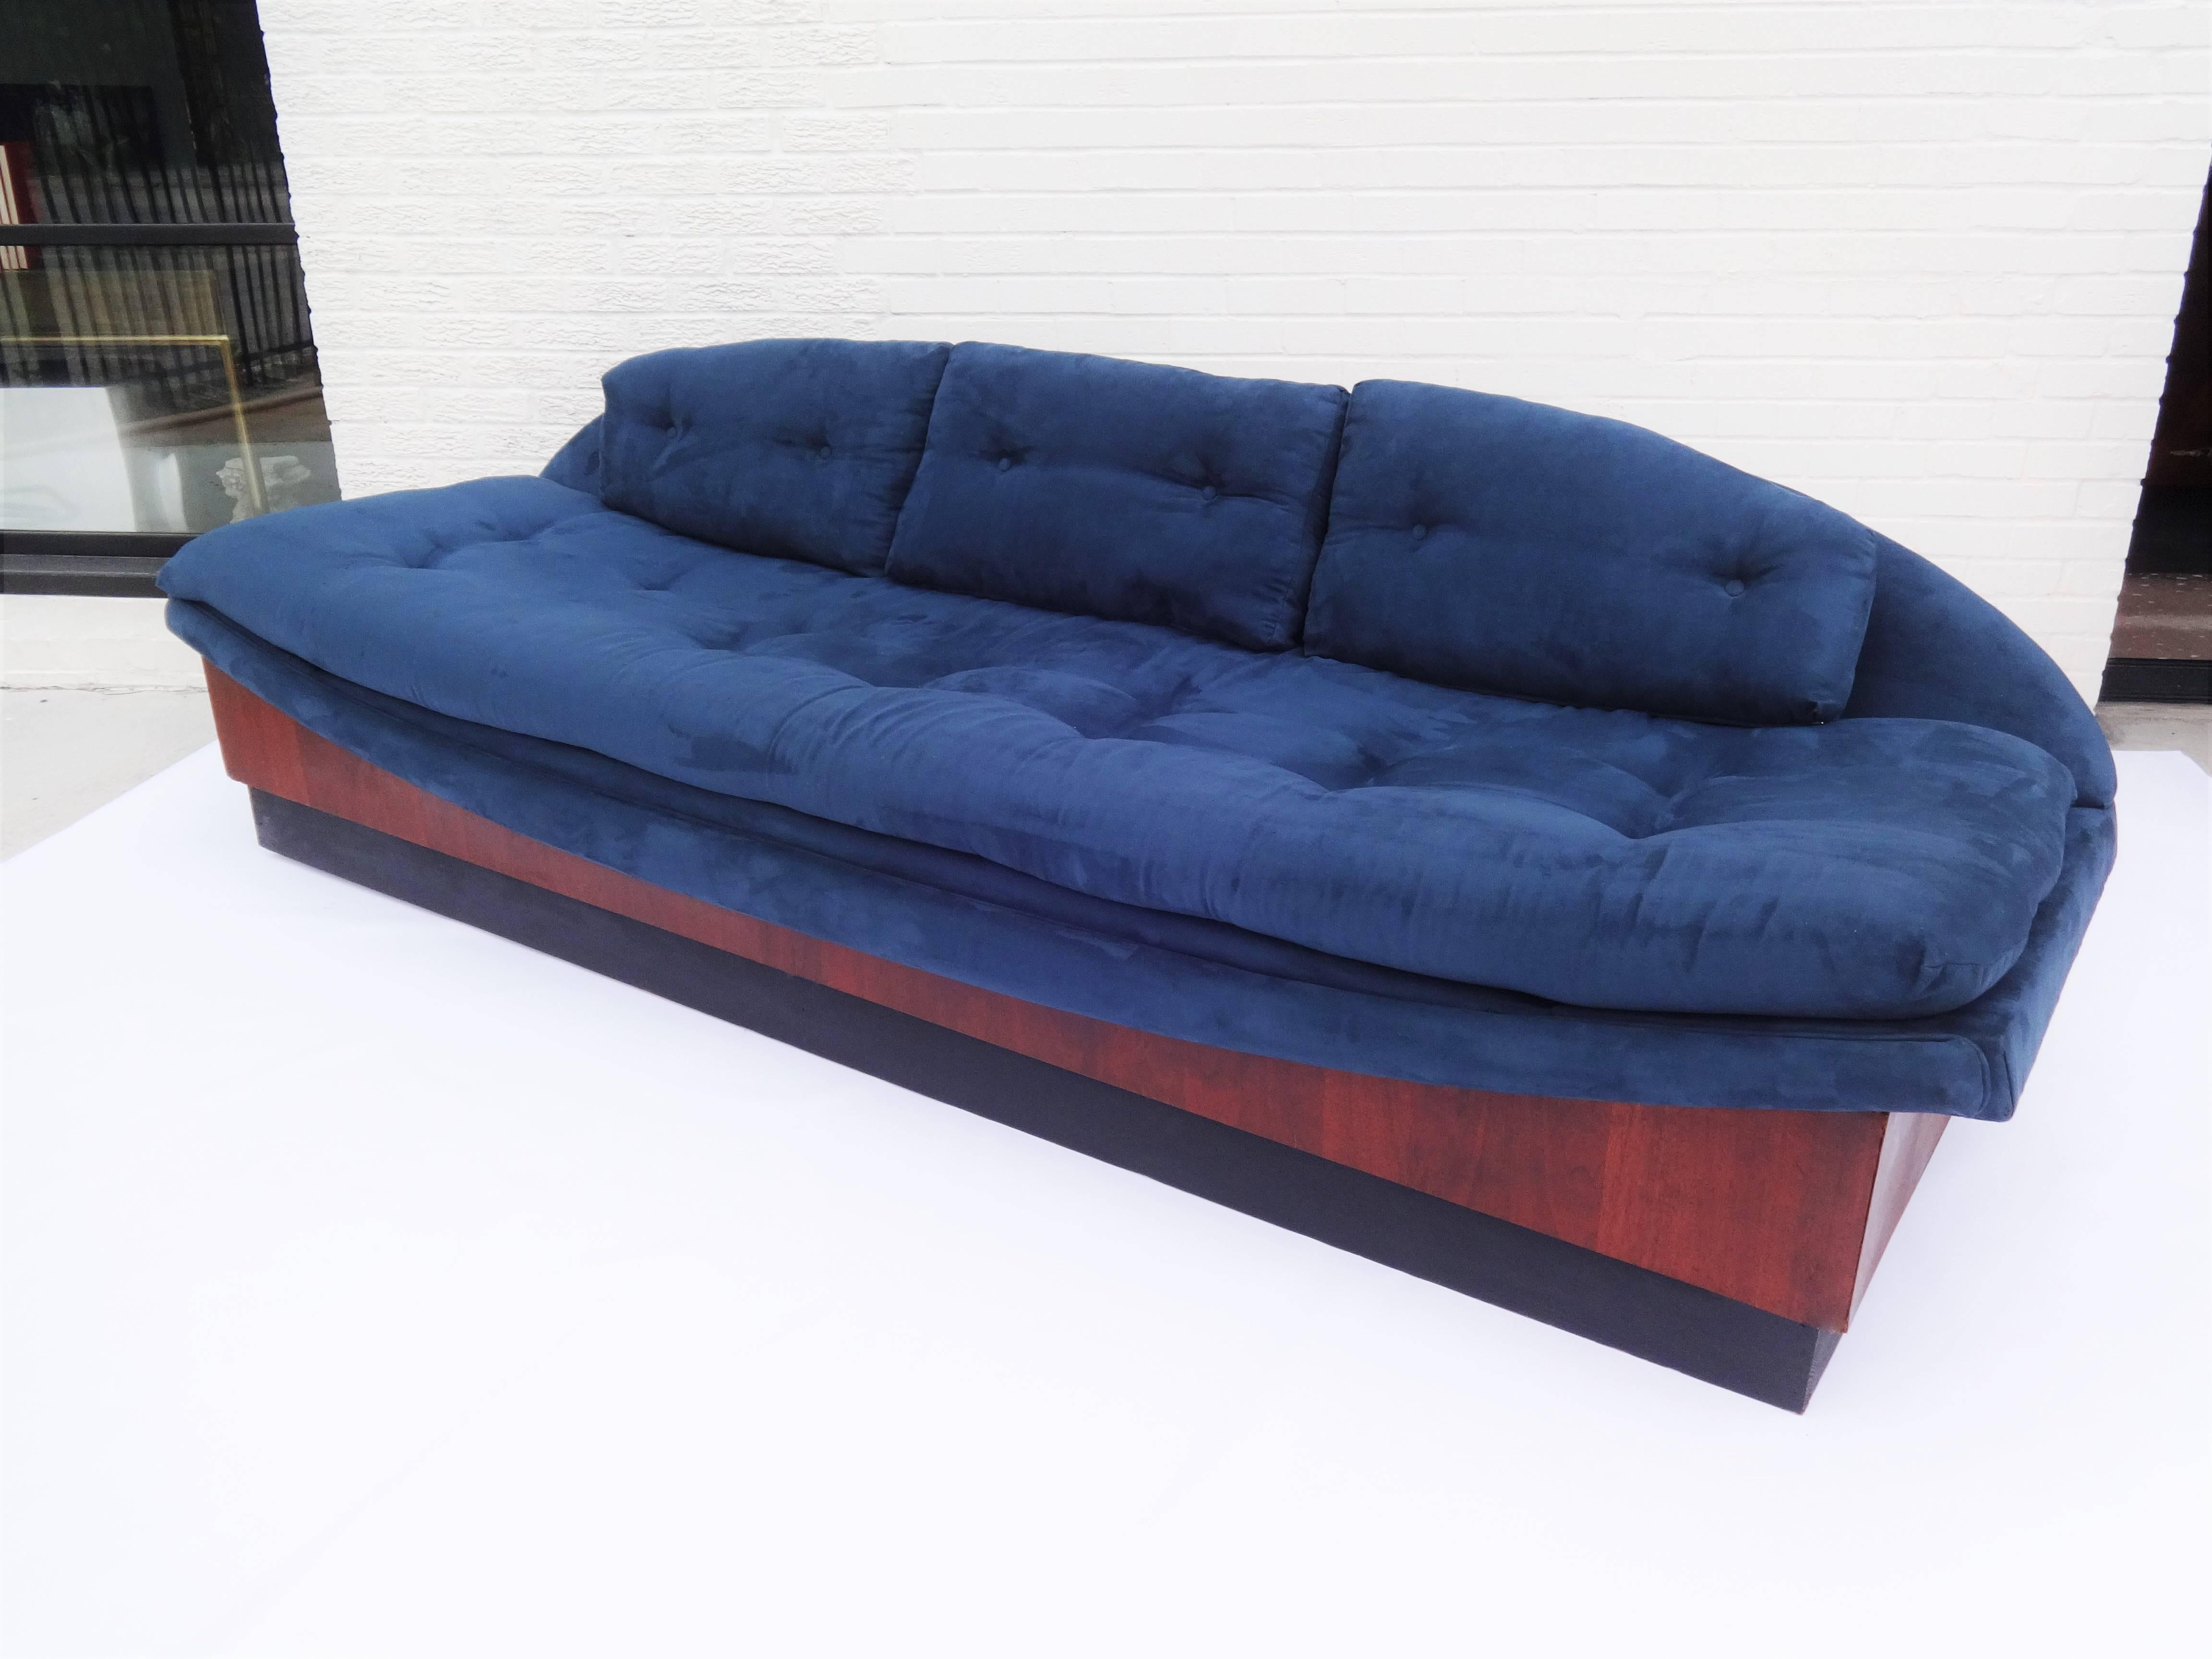 Vintage sculptural Gondola sofa designed by Adrian Pearsall for Craft Associates USA, circa 1965. The sofa floats above a matte black recessed platform and a 9.25 inch strip of walnut wood. Upholstered in blue fabric.
 